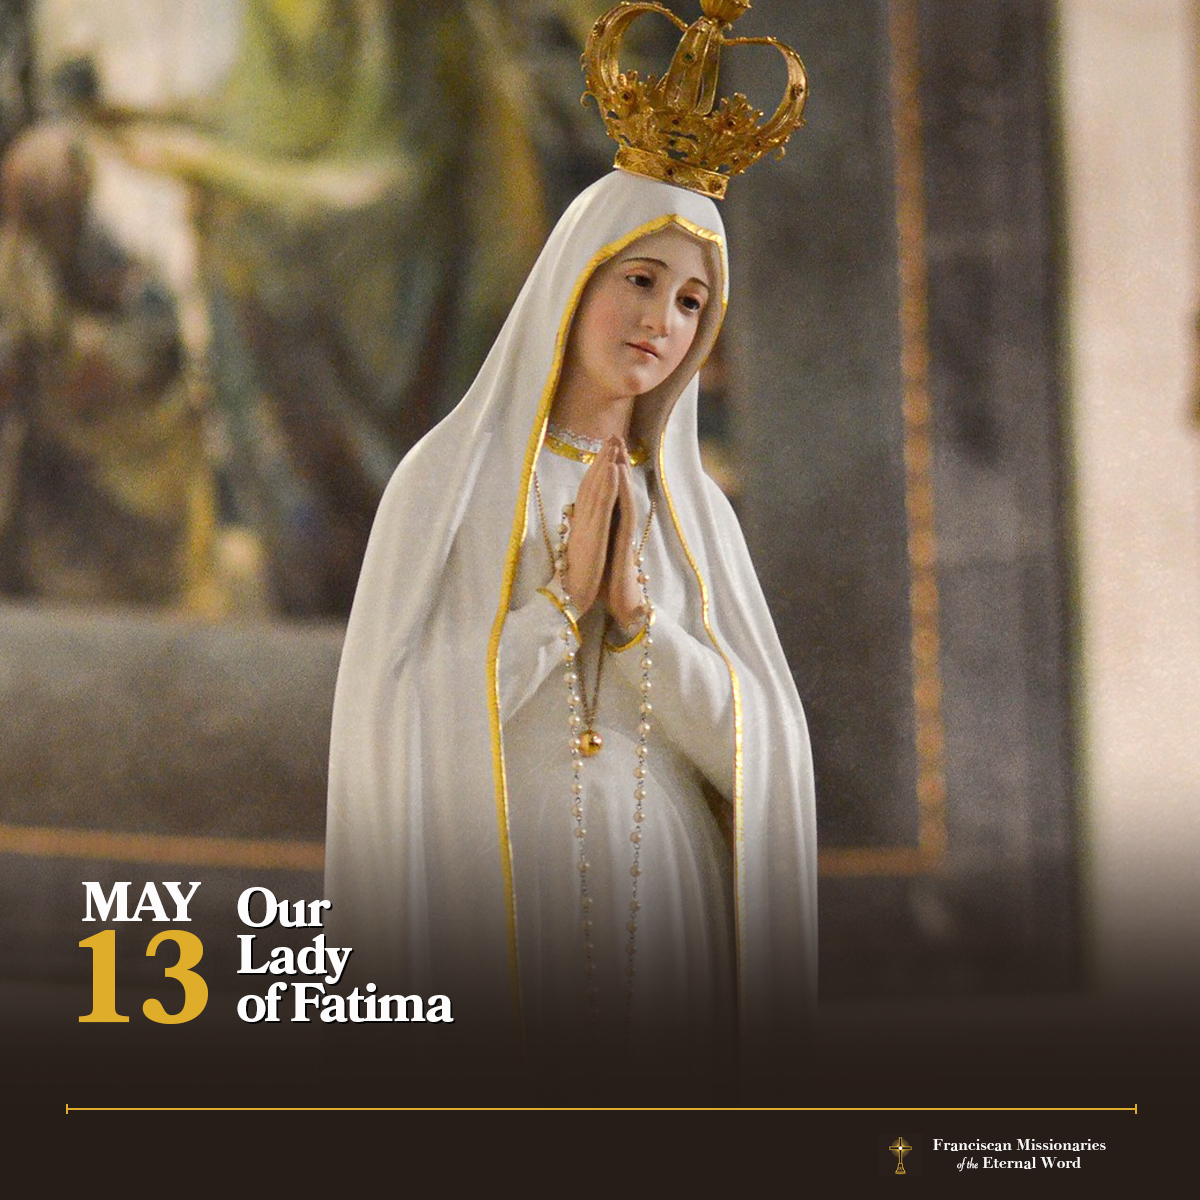 'In the end my Immaculate Heart will triumph' - Our Lady of Fatima